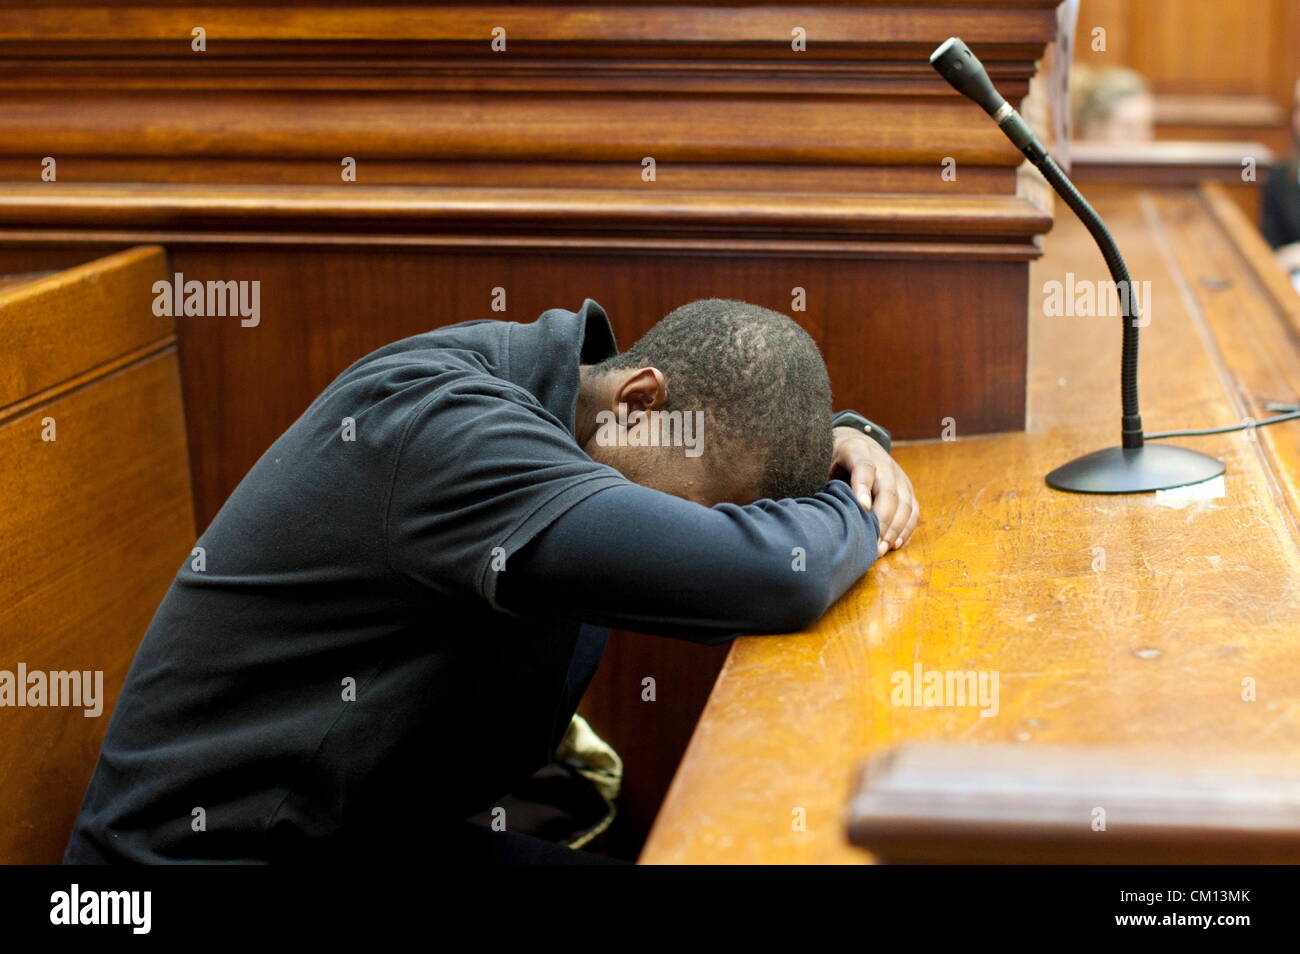 CAPE TOWN, SOUTH AFRICA: Xolile Mngeni appears in the Cape High Court on September 10, 2012 in connection with the murder of Anni Dewani in Cape Town, South Africa. Mngeni is accused of shooting Anni, in a murder allegedly plotted by her British husband Shrien Dewani. (Photo by Gallo Images / Foto24 / Ruan Springorum) Stock Photo